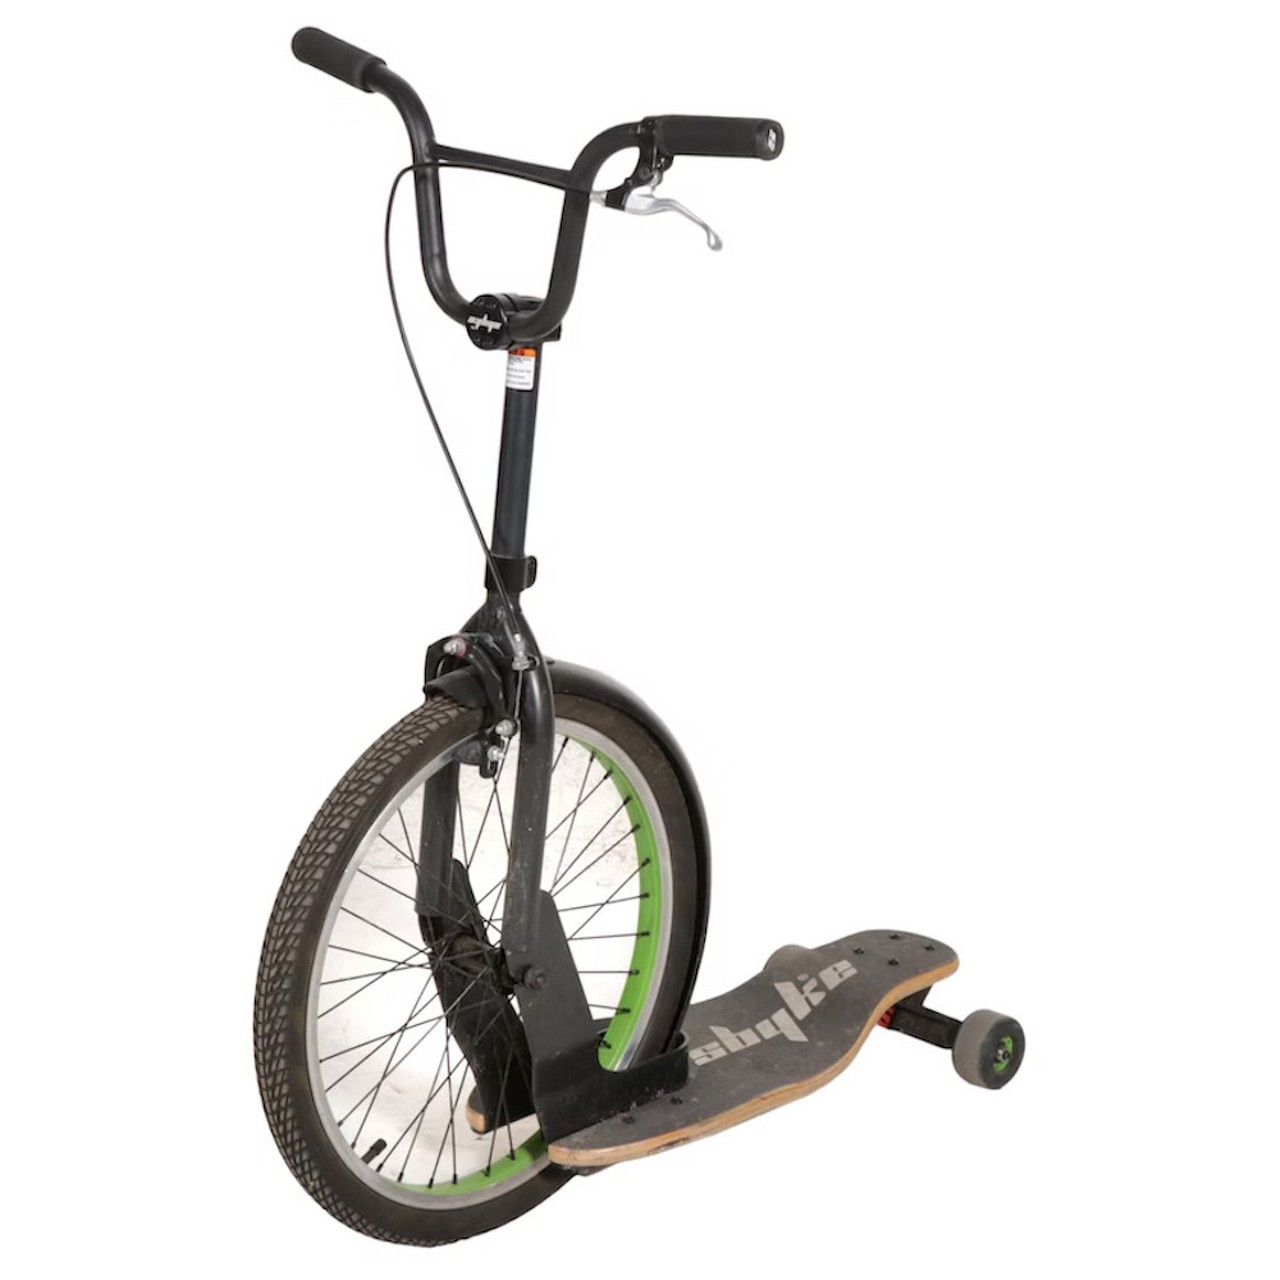 Sbyke Skateboard Bike
The challenge of figuring out how to ride this unicycle-skateboard hybrid is a gift to everyone involved. Just pump up the front tire and you have the most unique gift under the tree for the kids (or adults) in your life. The bizarre nature of this bike makes a companion helmet a solid gift idea.